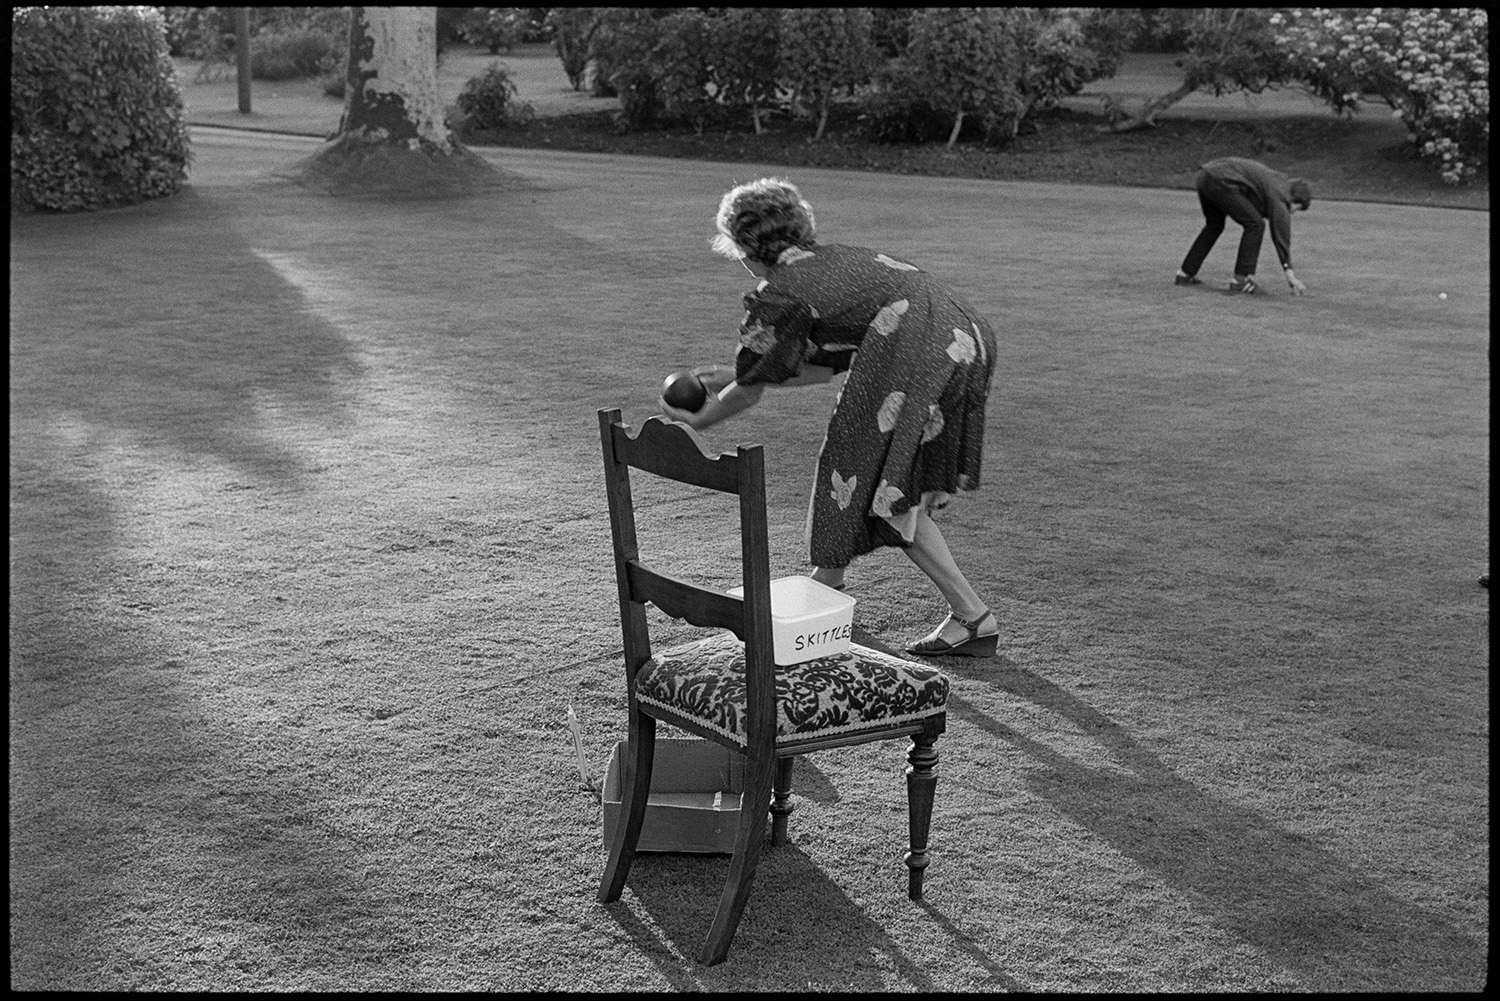 Sideshows at garden fete, bowls, hoop la, billiards, golf. 
[A woman playing bowls on the lawn at a fete at the Old Rectory, Merton. Shadows from trees are falling on the grass and a person is picking up golf balls in the background.]